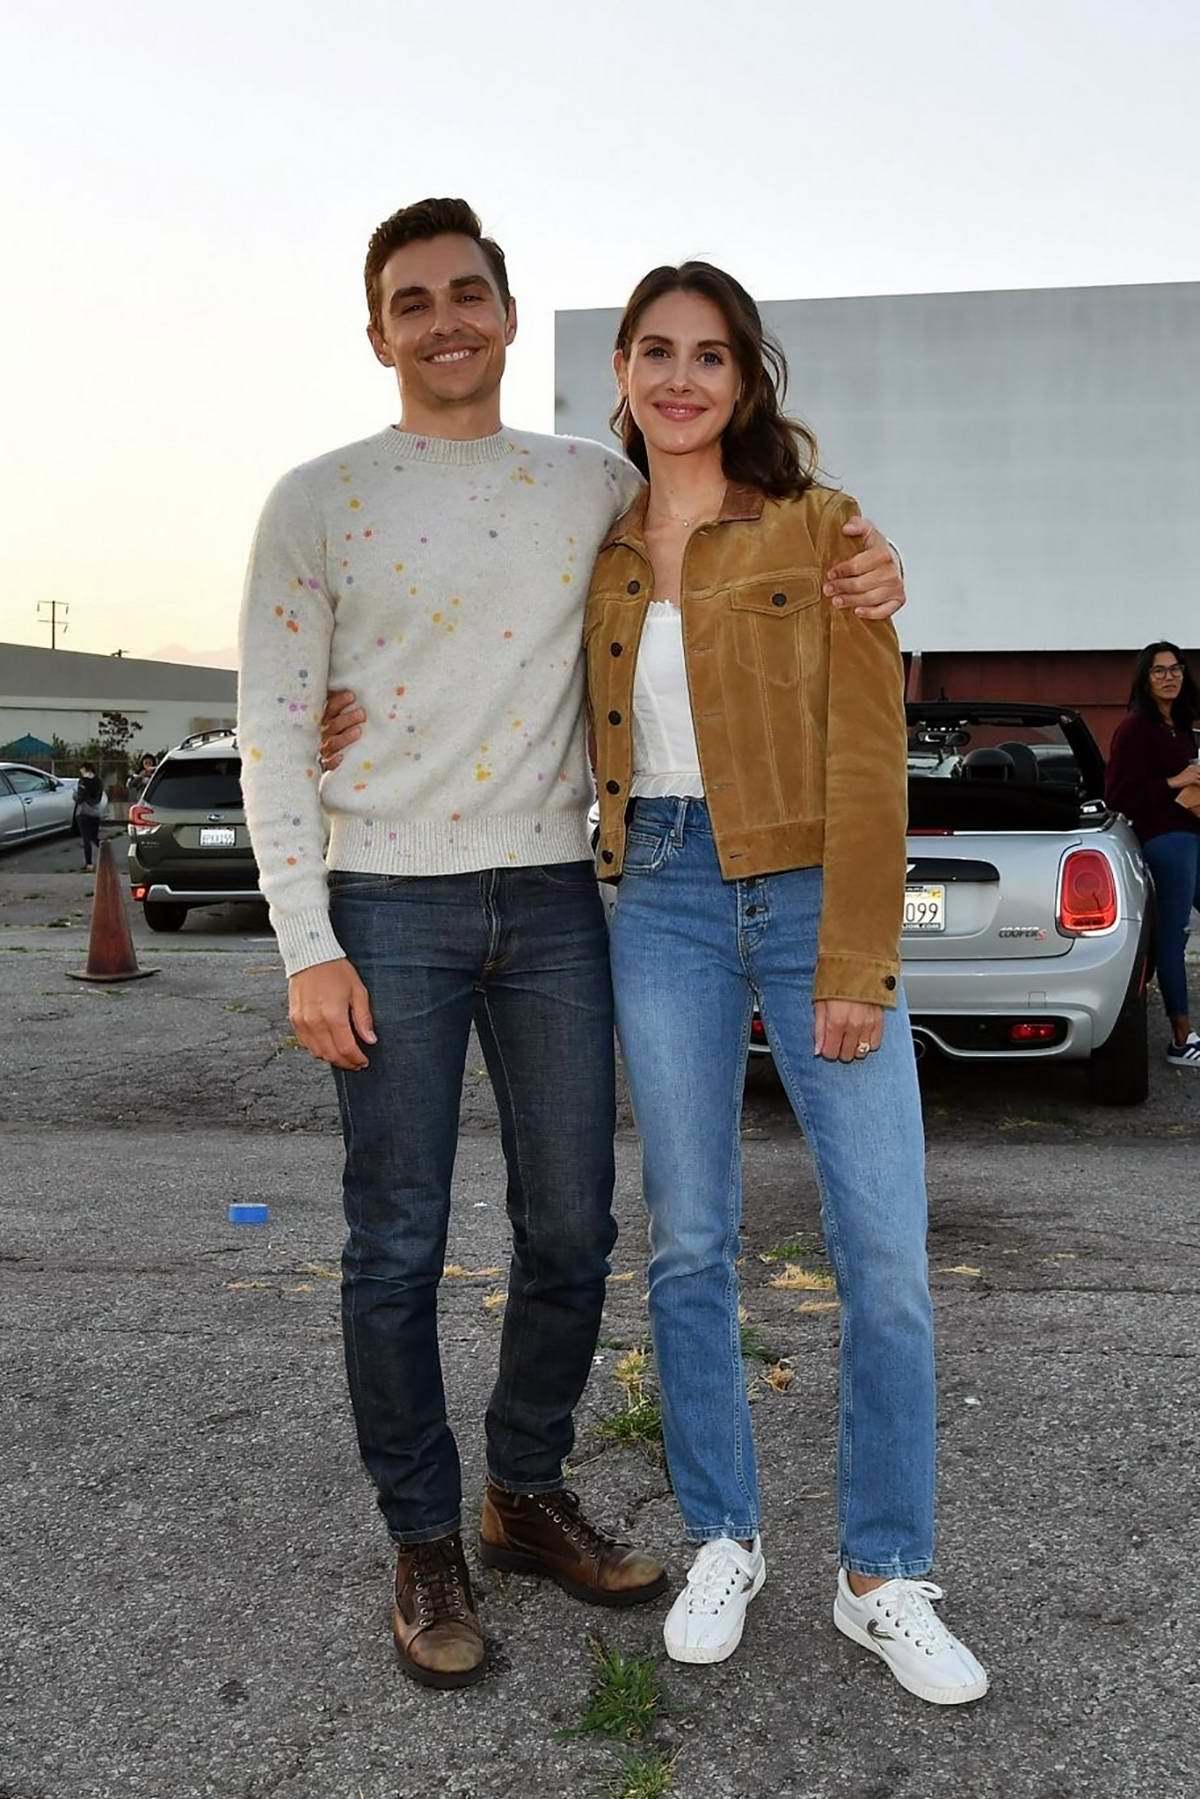 Alison Brie And Dave Franco Attend A Drive In Screening Of The Rental In City Of Industry California 180620 10 